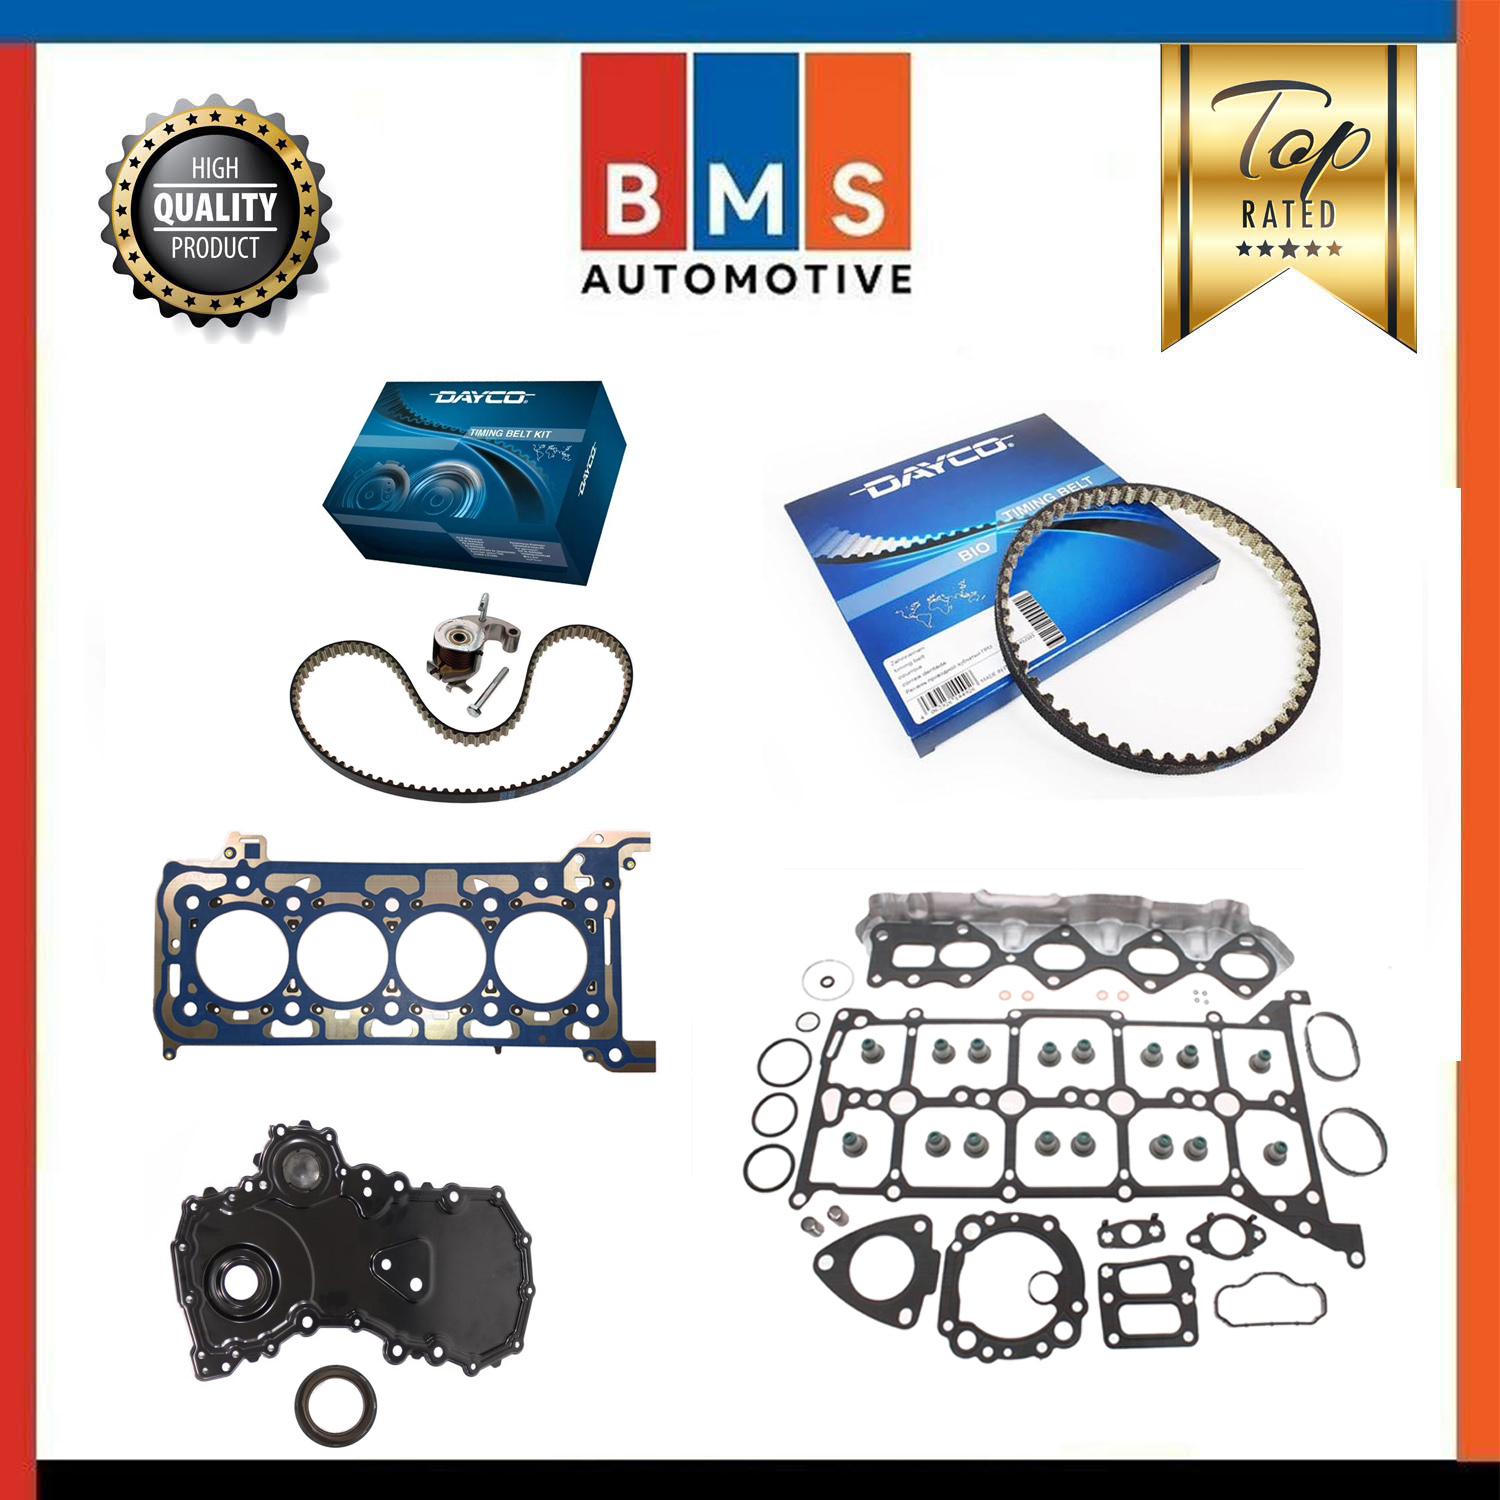 Ford custom 2.0 diesel ecoblue timing cover and engine rebuild kit